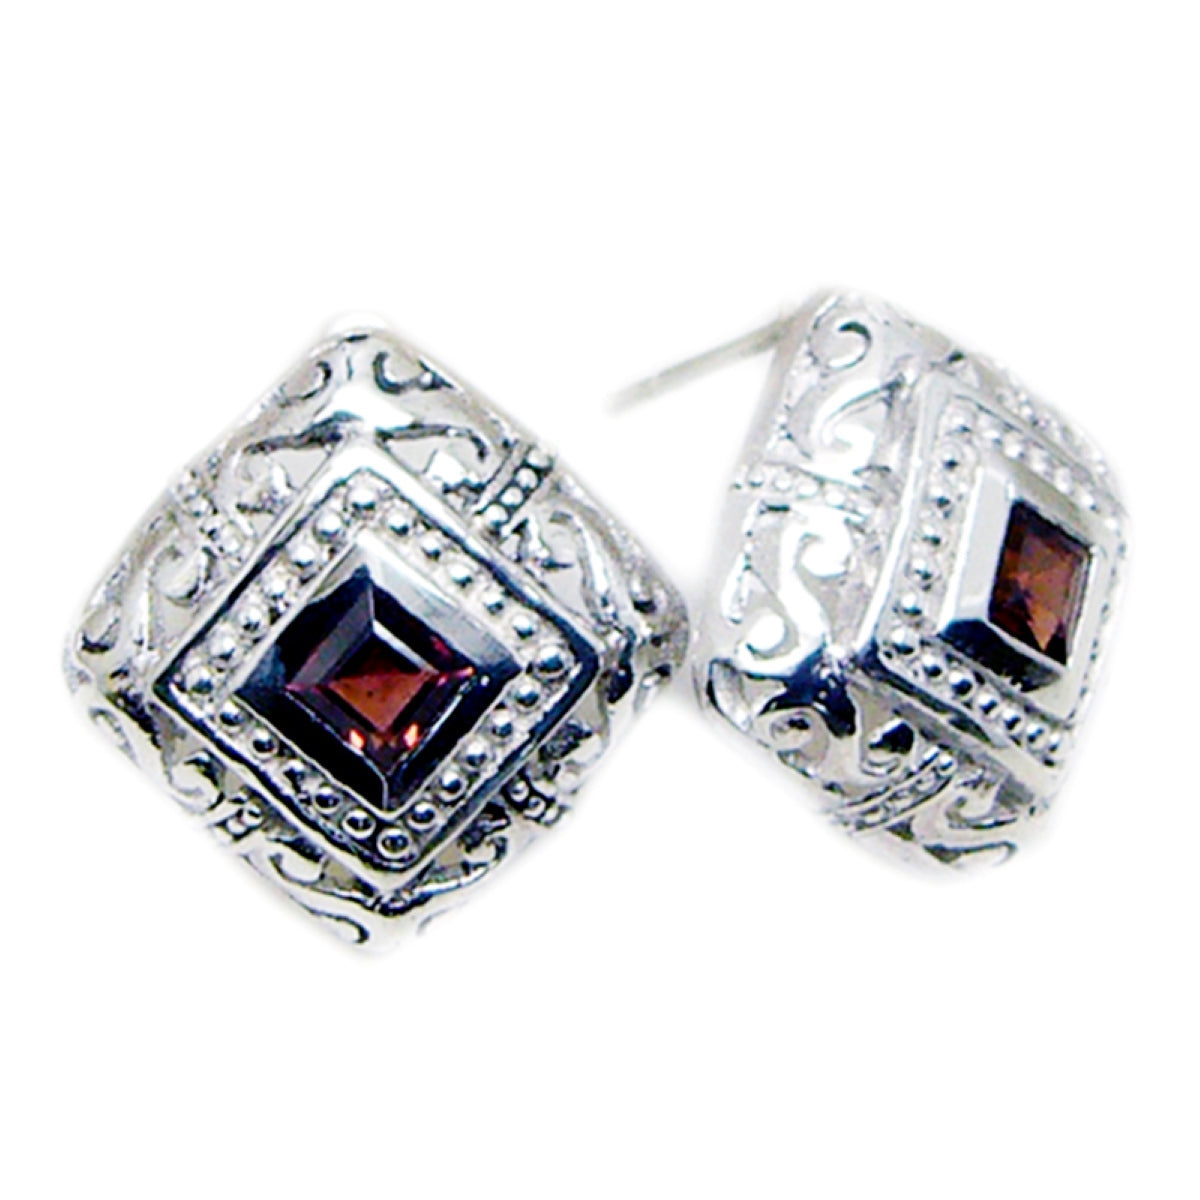 Riyo Real Gemstones square Faceted Red Garnet Silver Earring gift for friends